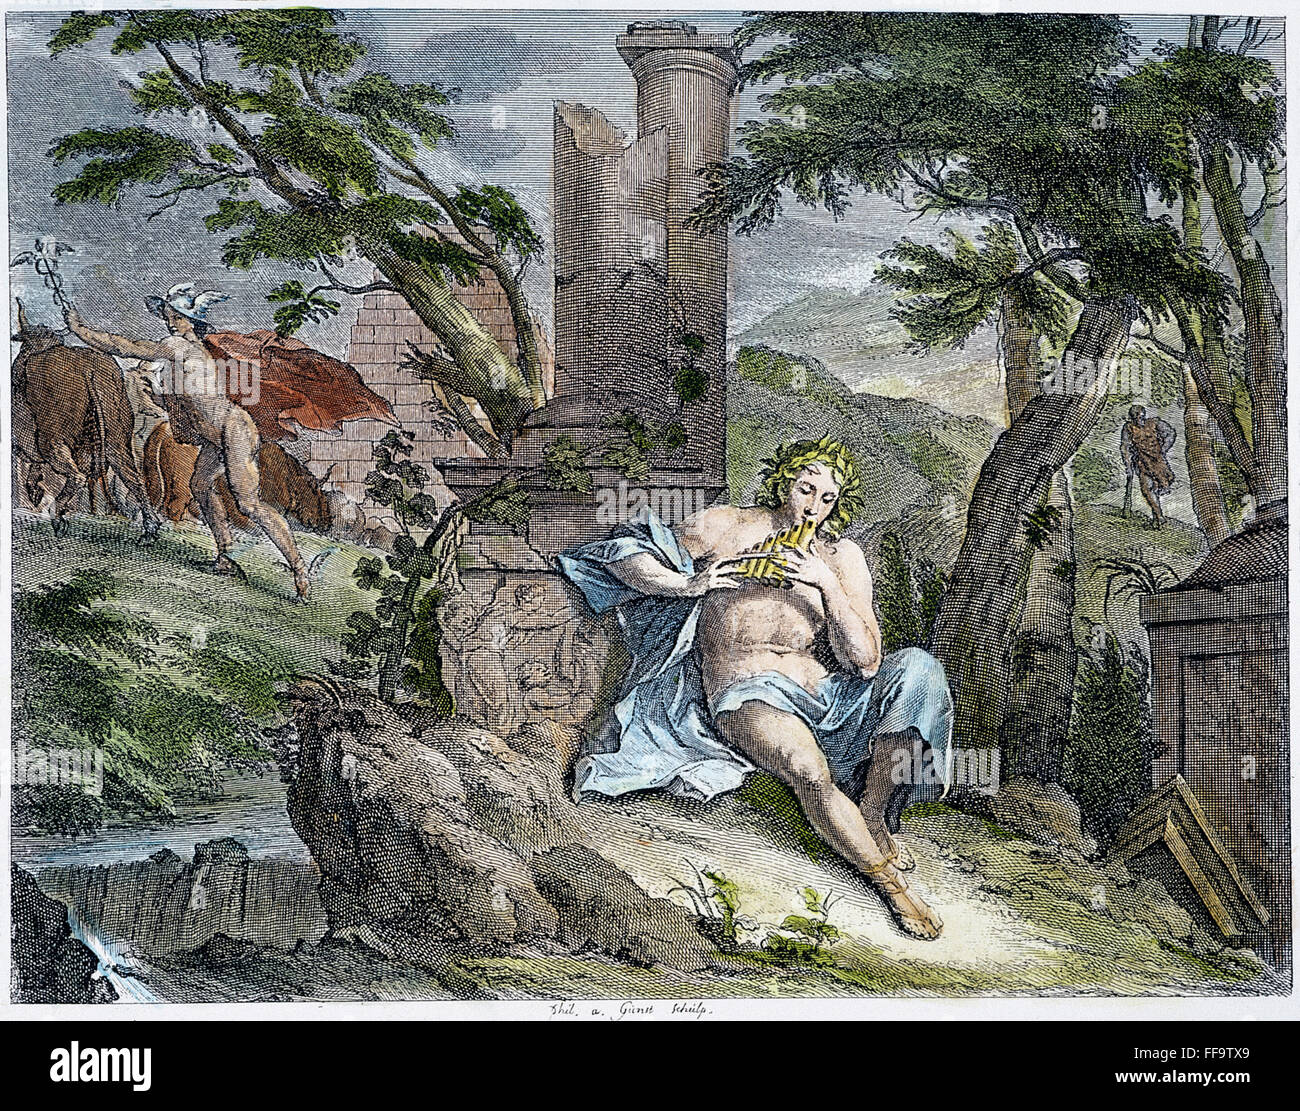 HERMES STEALING OXEN. /nHermes stealing Apollo's oxen. Line engraving, 18th century. Stock Photo